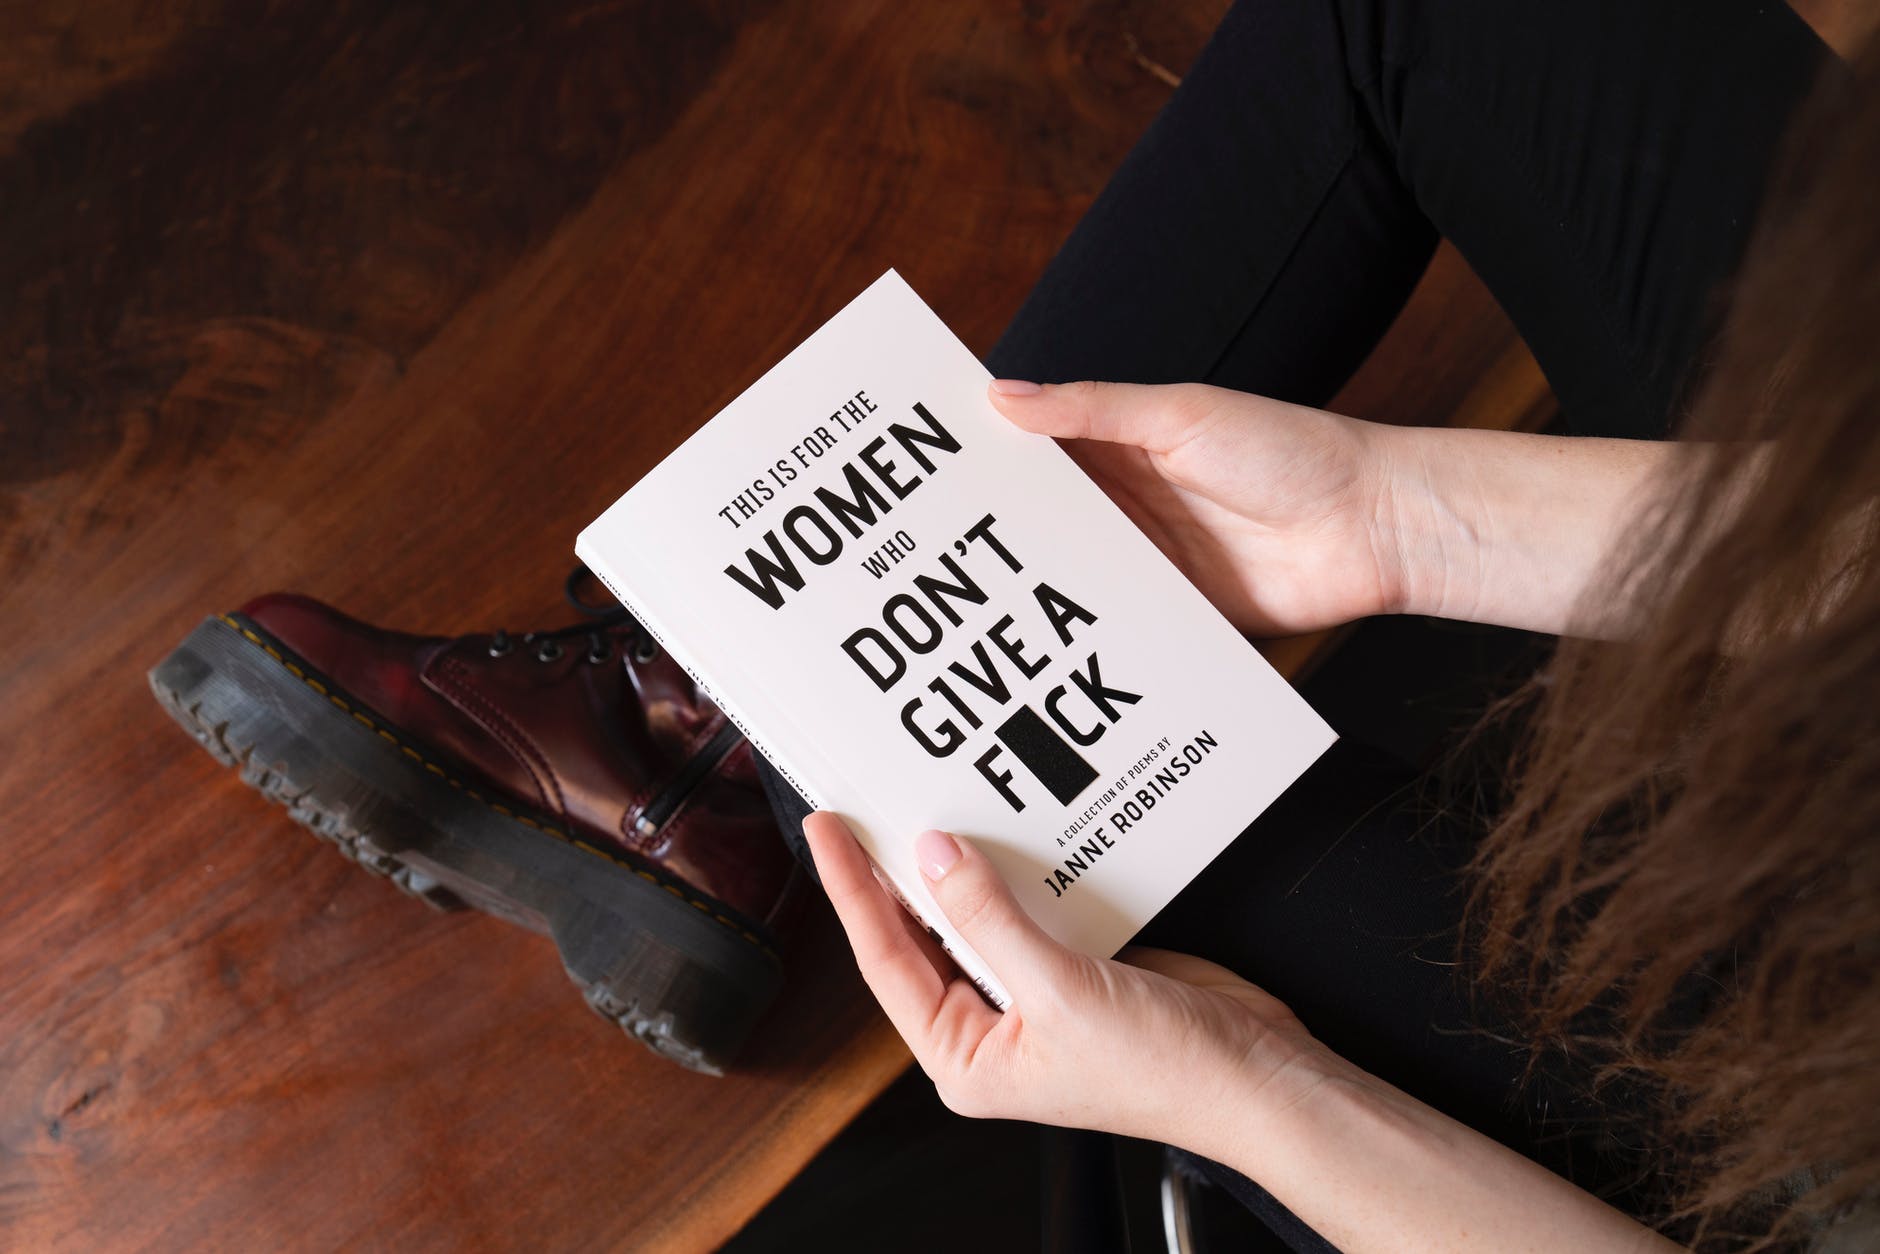 A woman holds a book entitled "This is For the Women Who Don't Give a F**k".